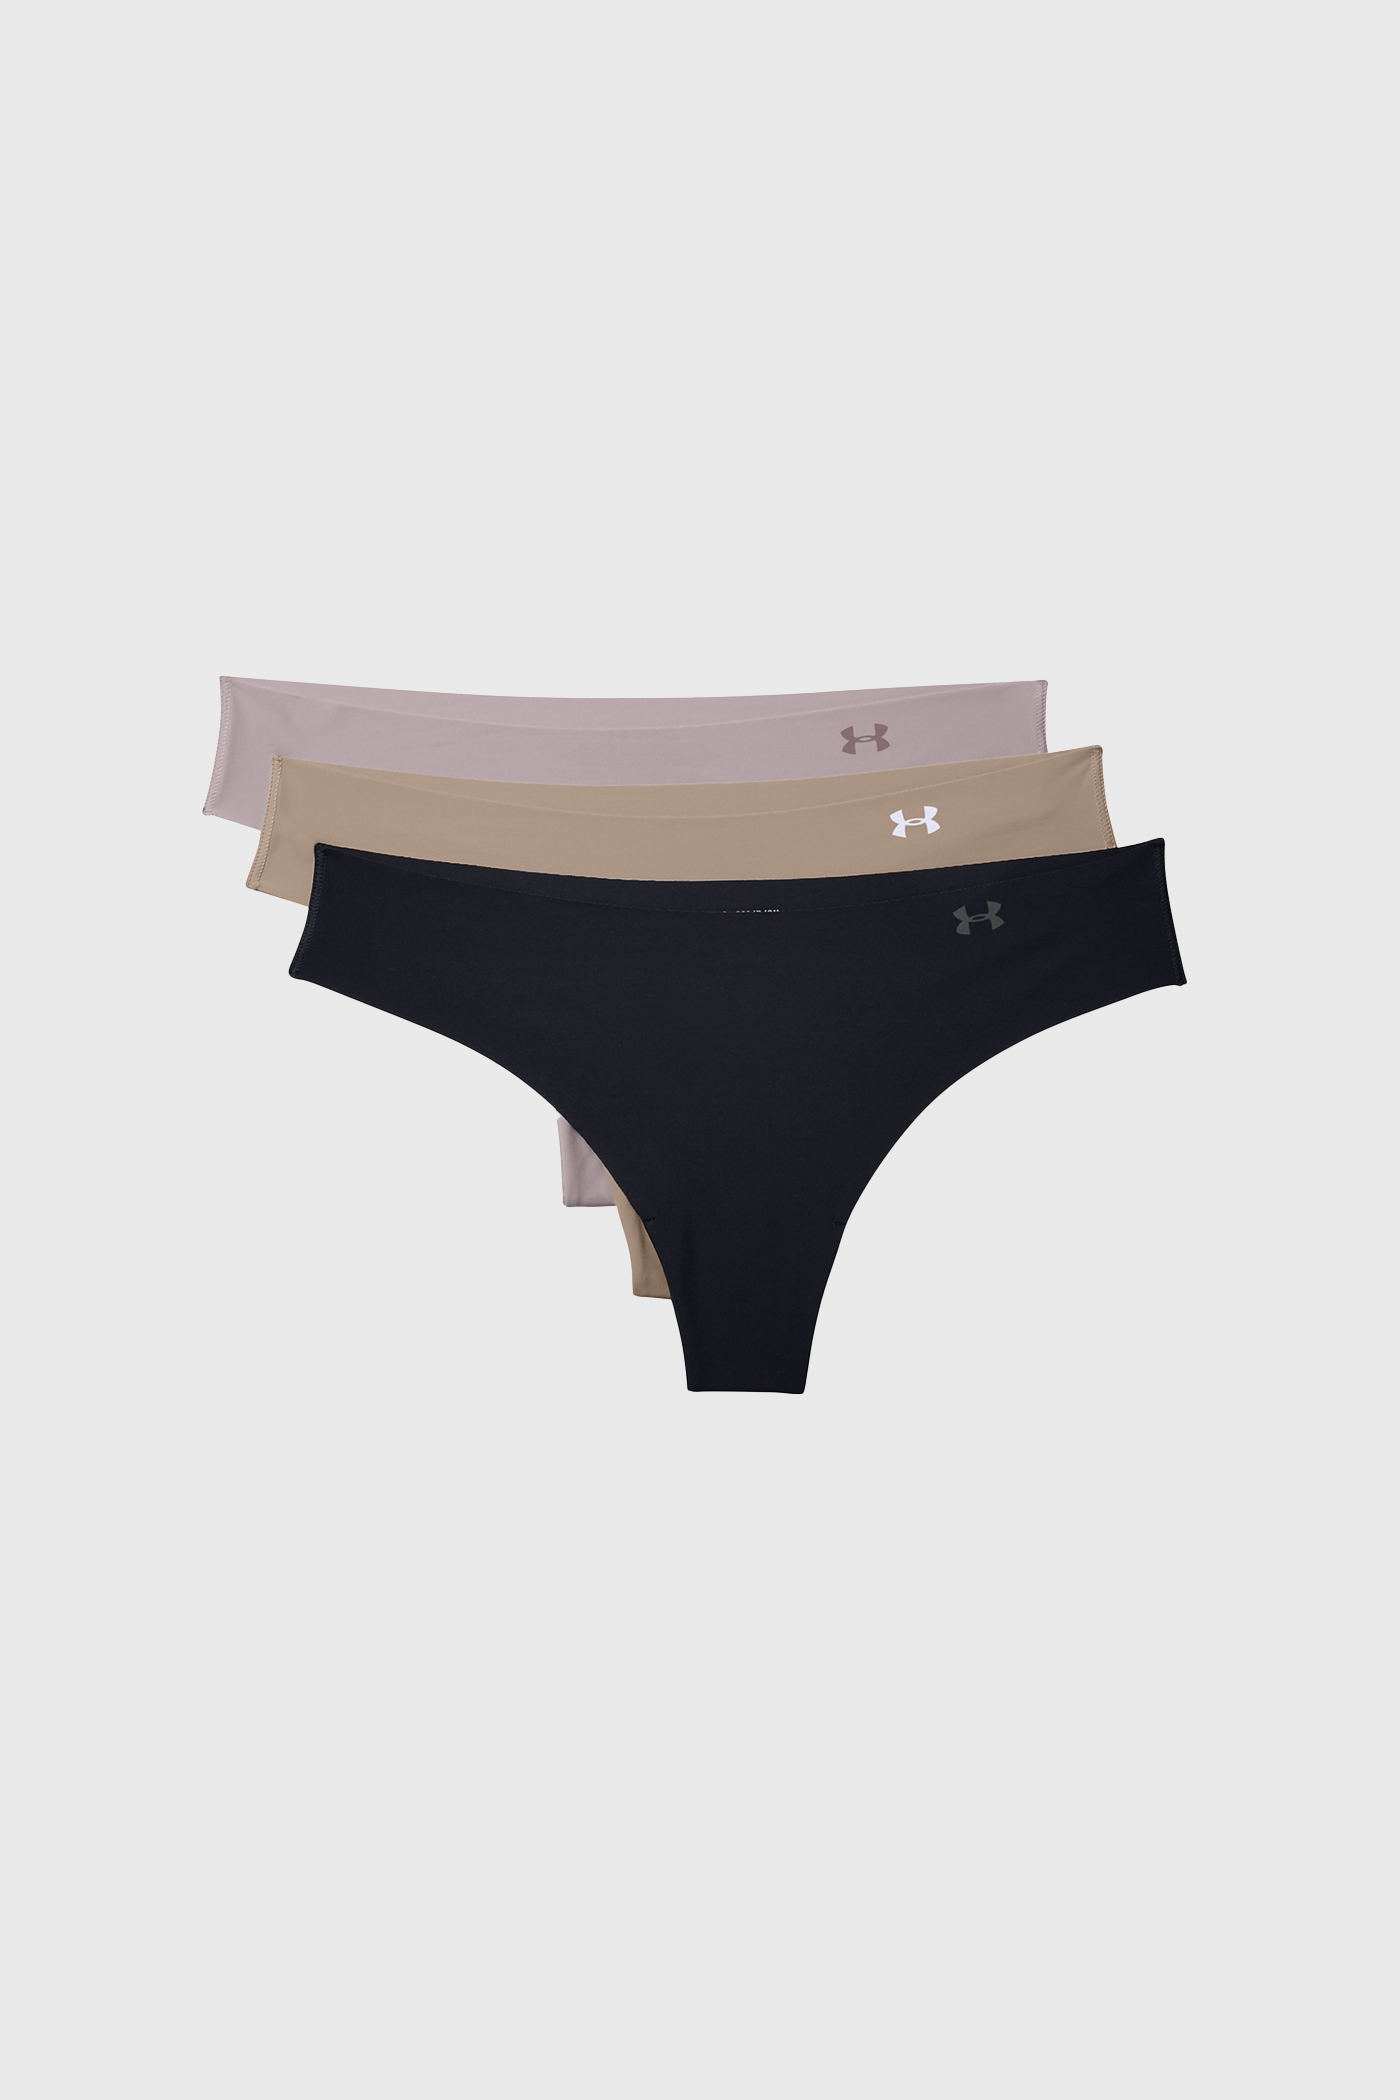 3 PACK Under Armour Thong sport bugyi | Astratex.hu